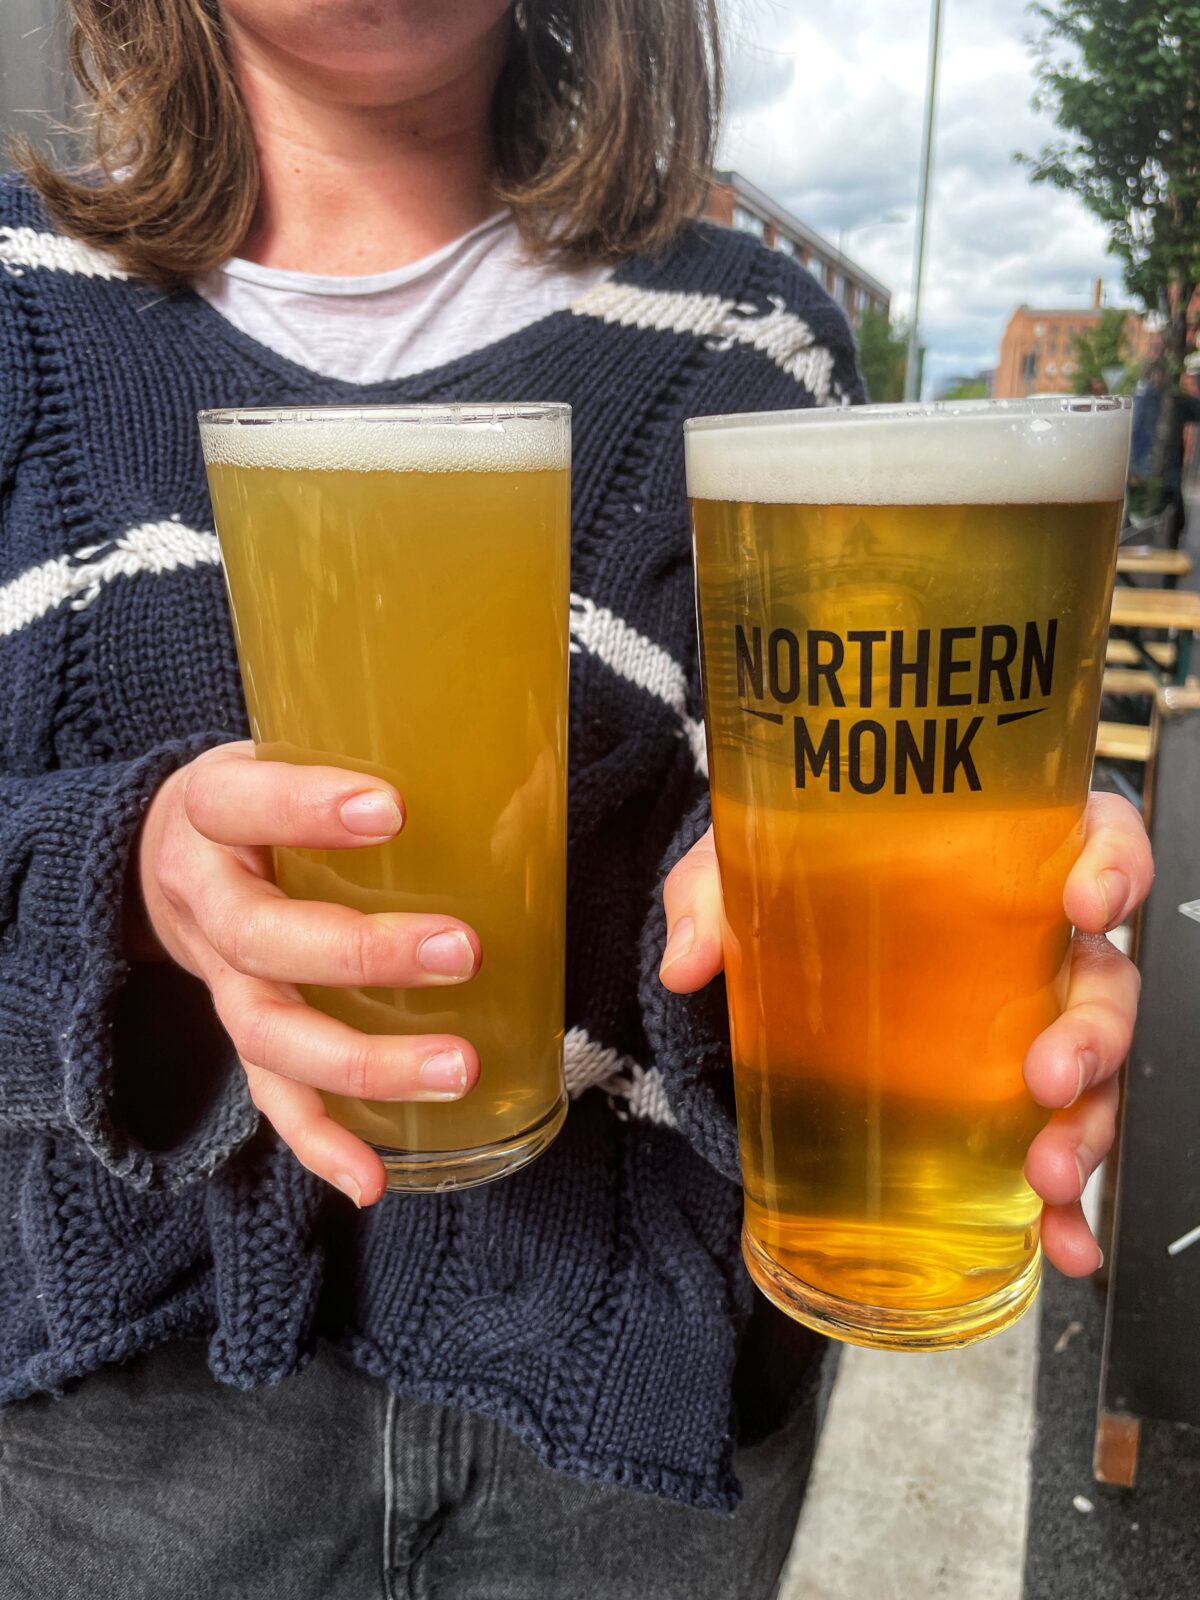 where does northern monk beer in manchester?